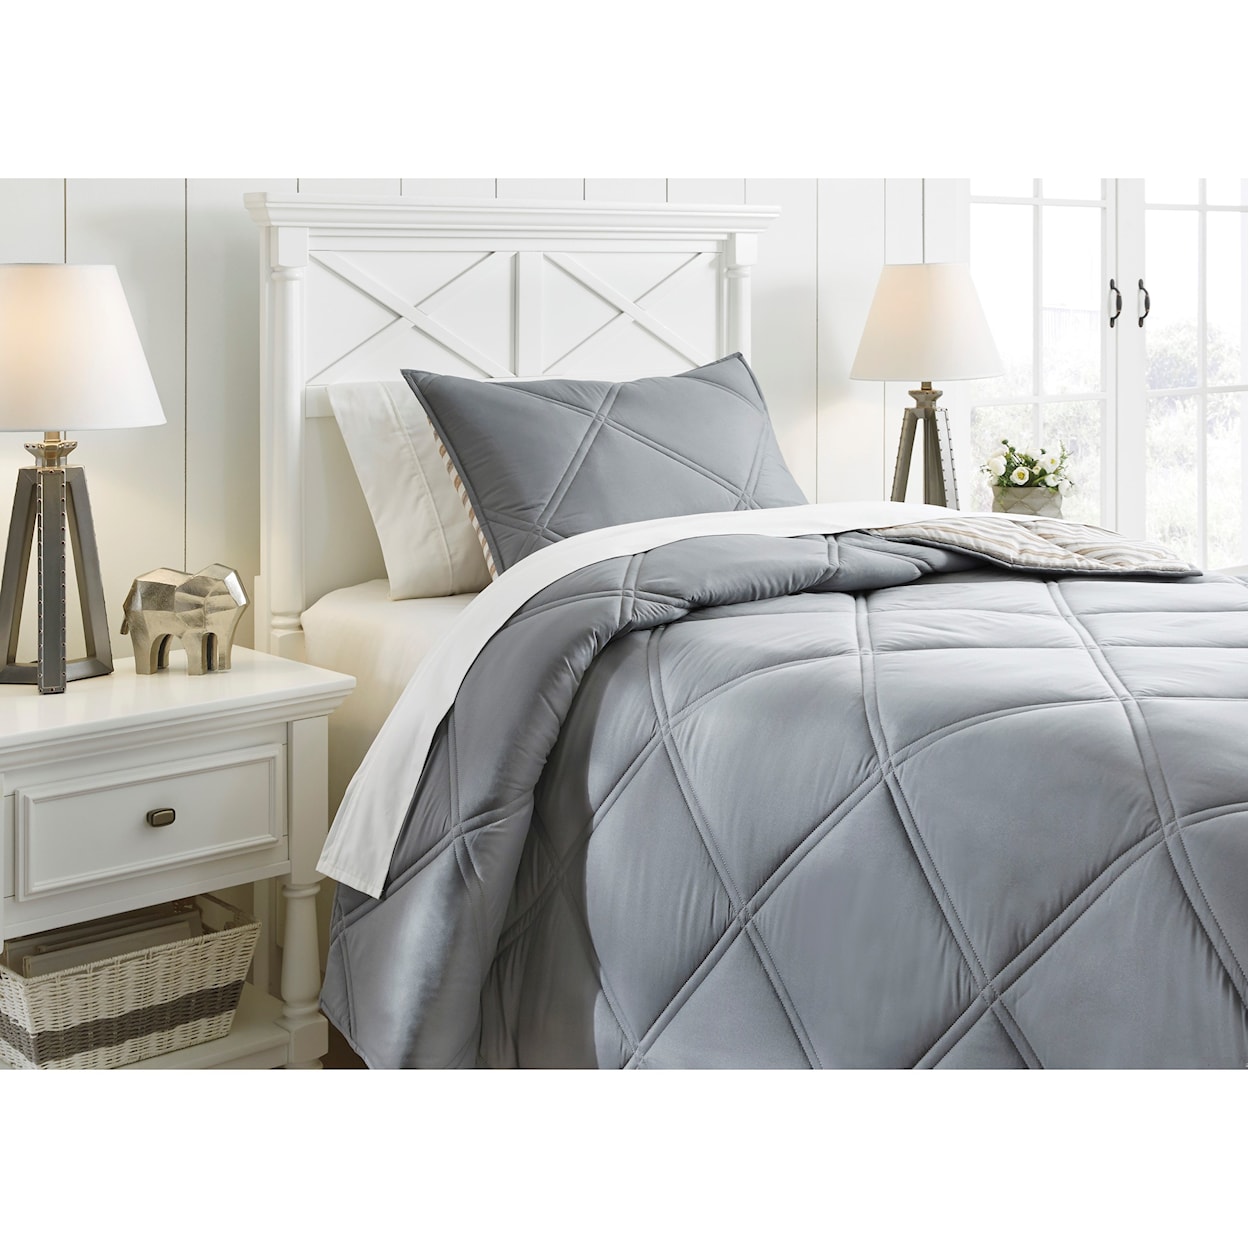 Signature Design by Ashley Bedding Sets Twin Rhey Tan/Brown/Gray Comforter Set